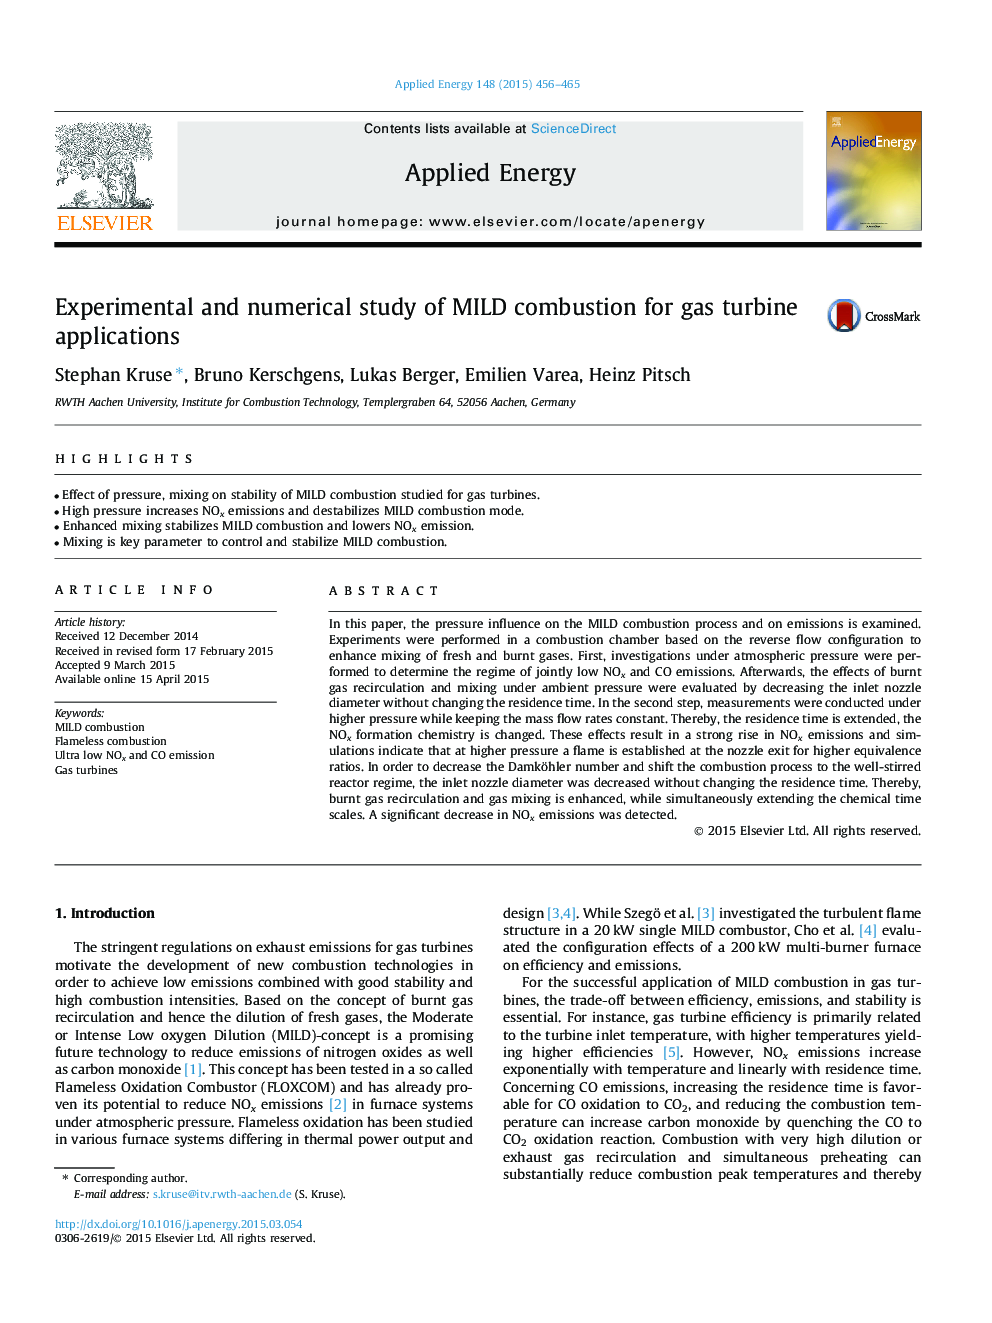 Experimental and numerical study of MILD combustion for gas turbine applications